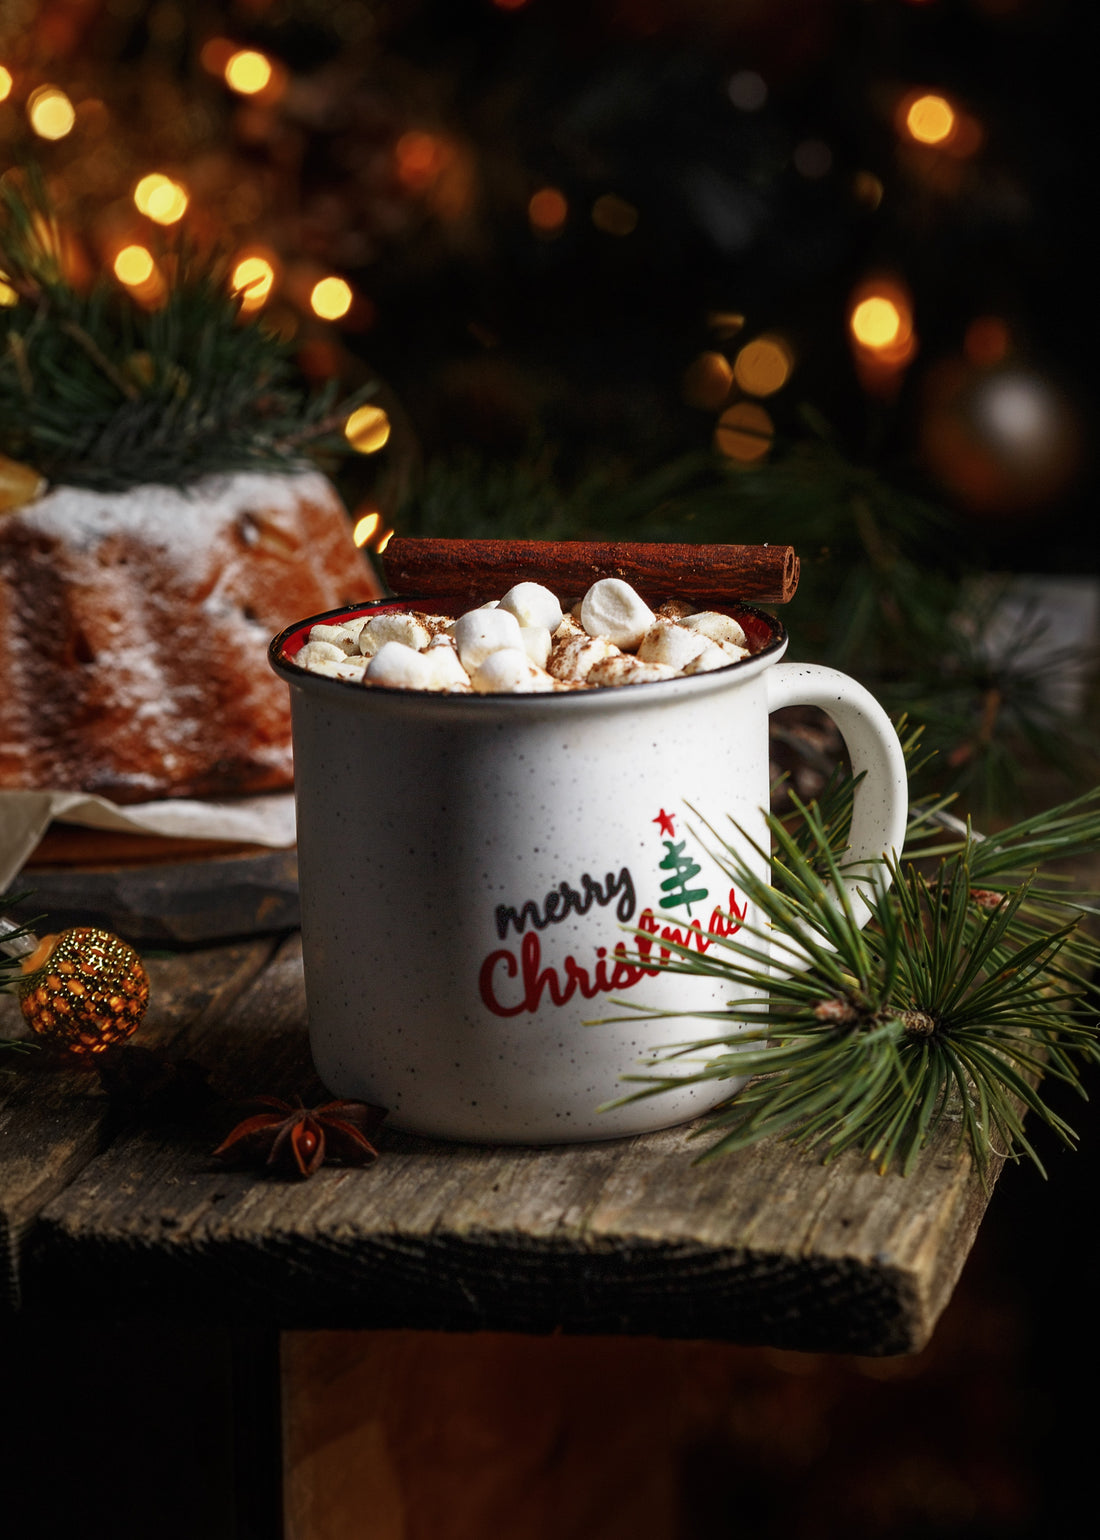 5 Delicious Christmas Coffee Recipes to Warm Up Your Holidays - The Coffee Connect